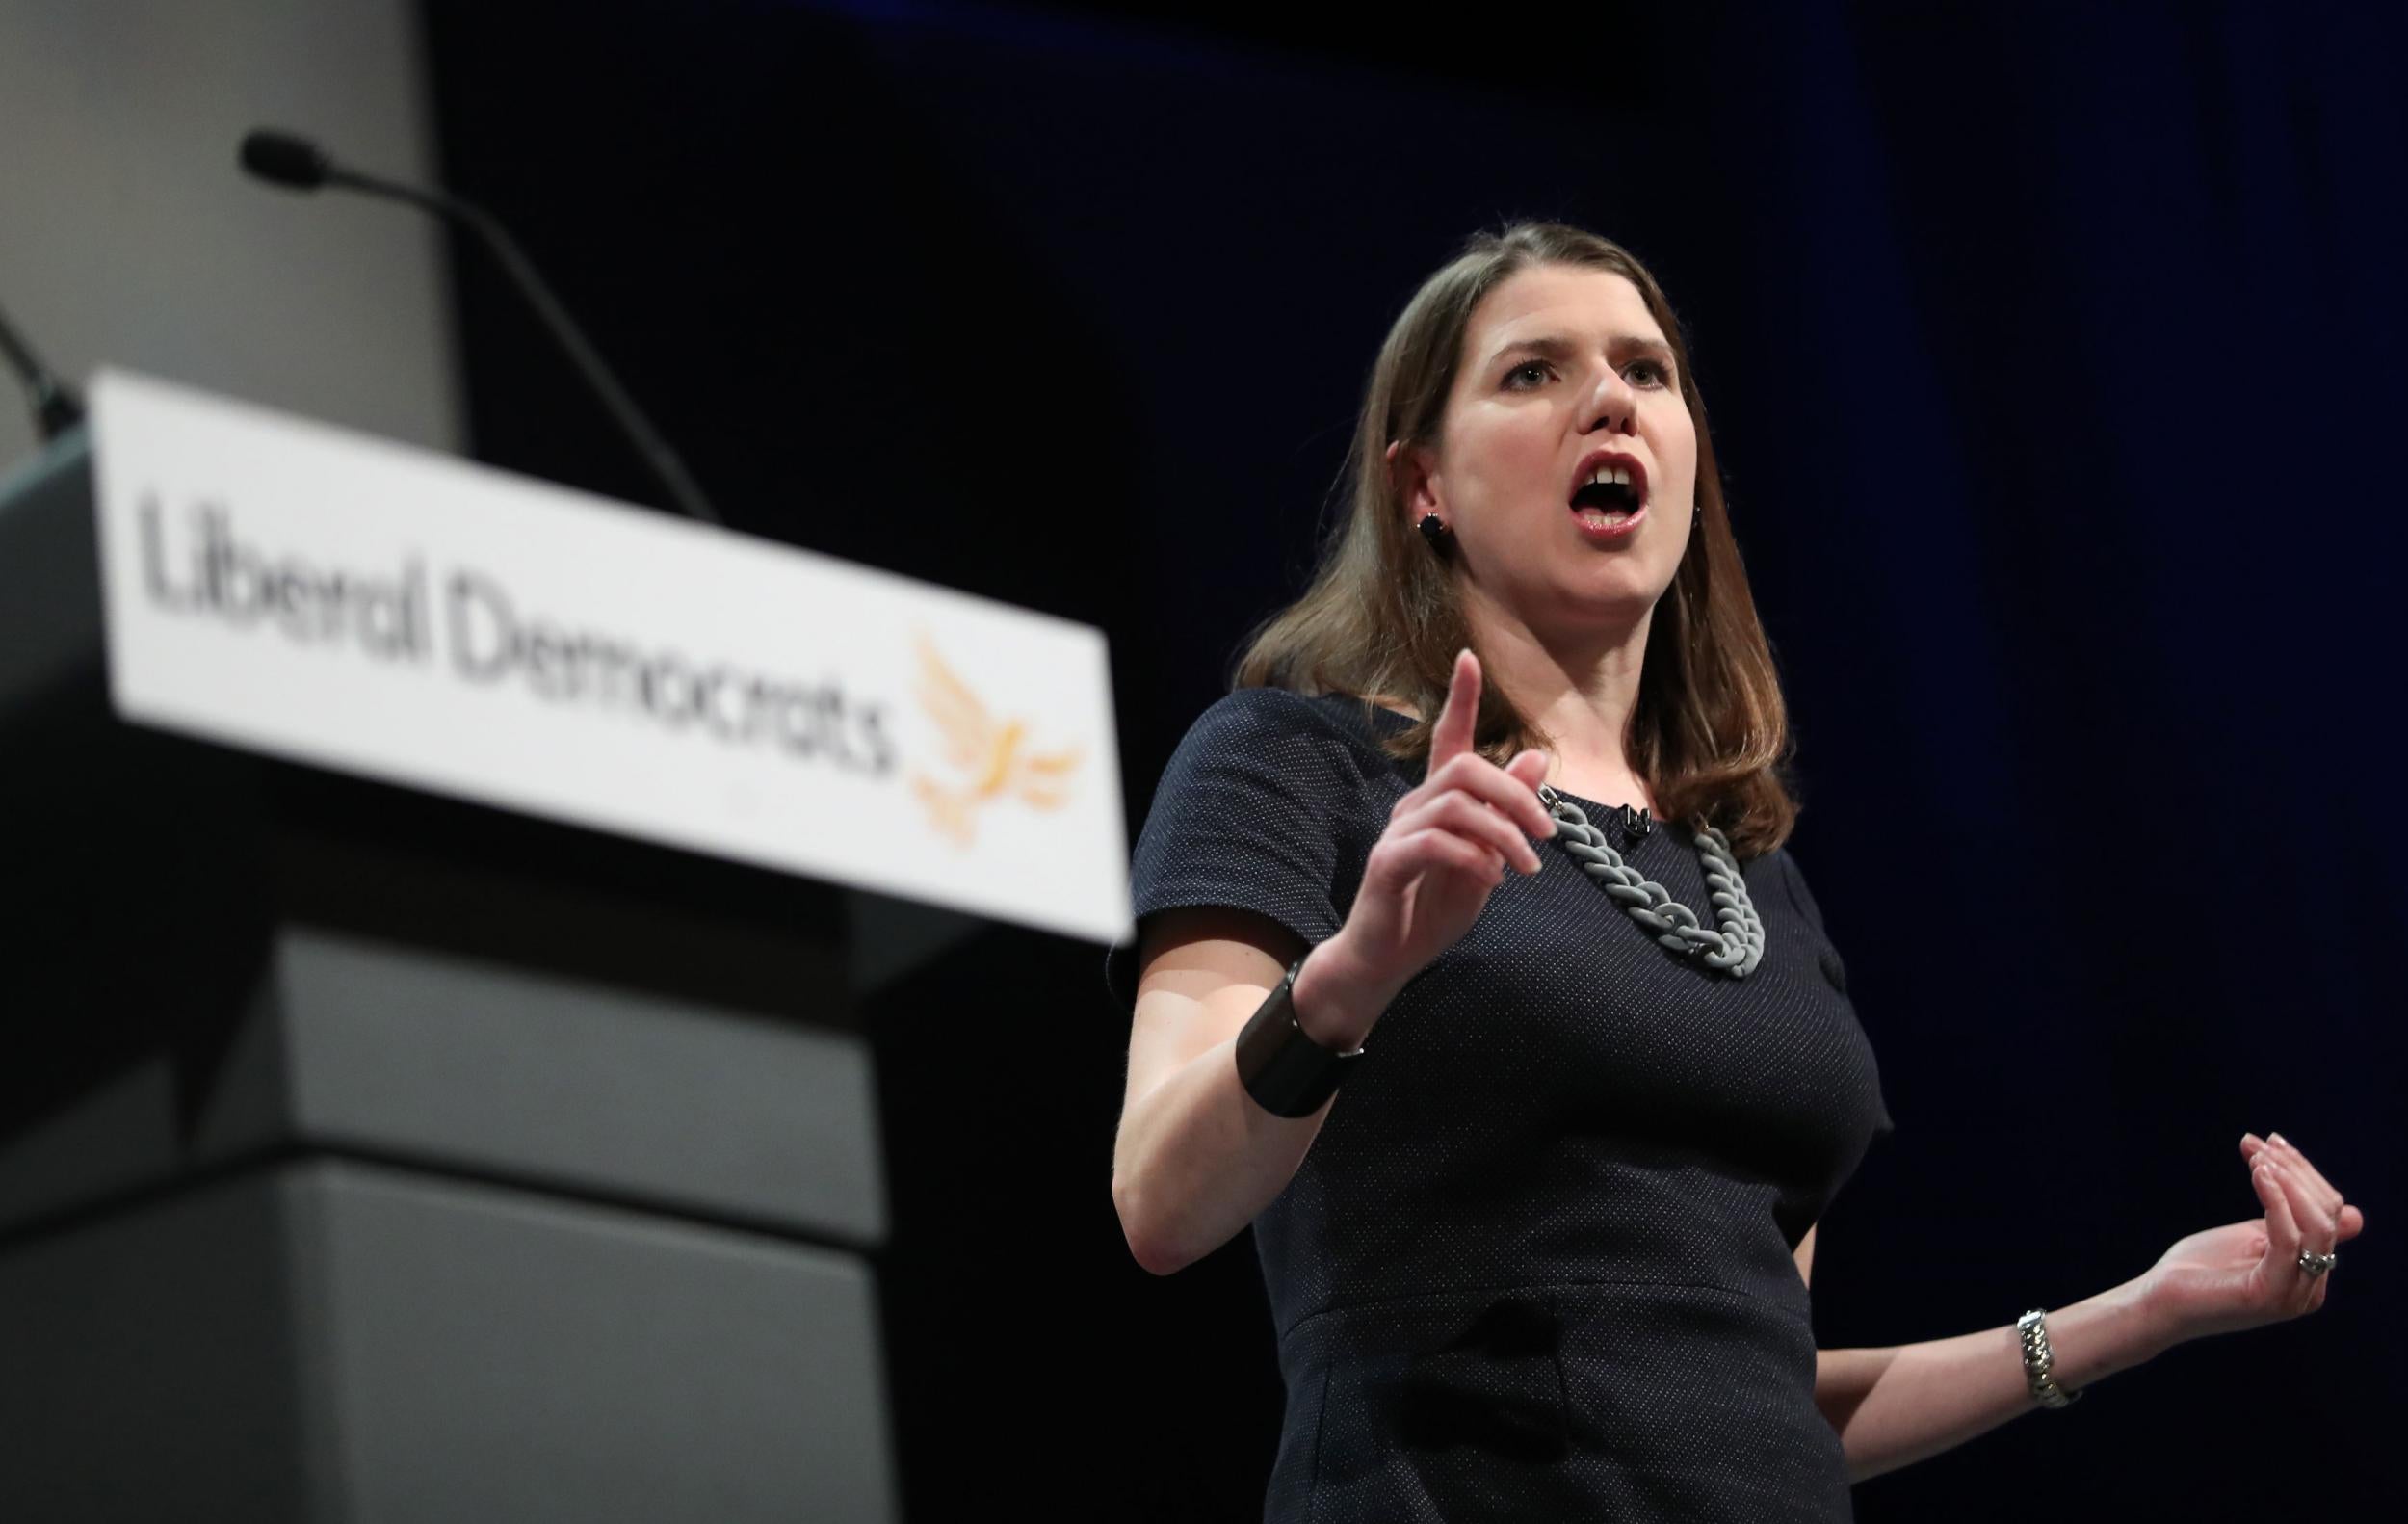 Jo Swinson reiterated the Liberal Democrats' pledge to hold a second referendum on Brexit